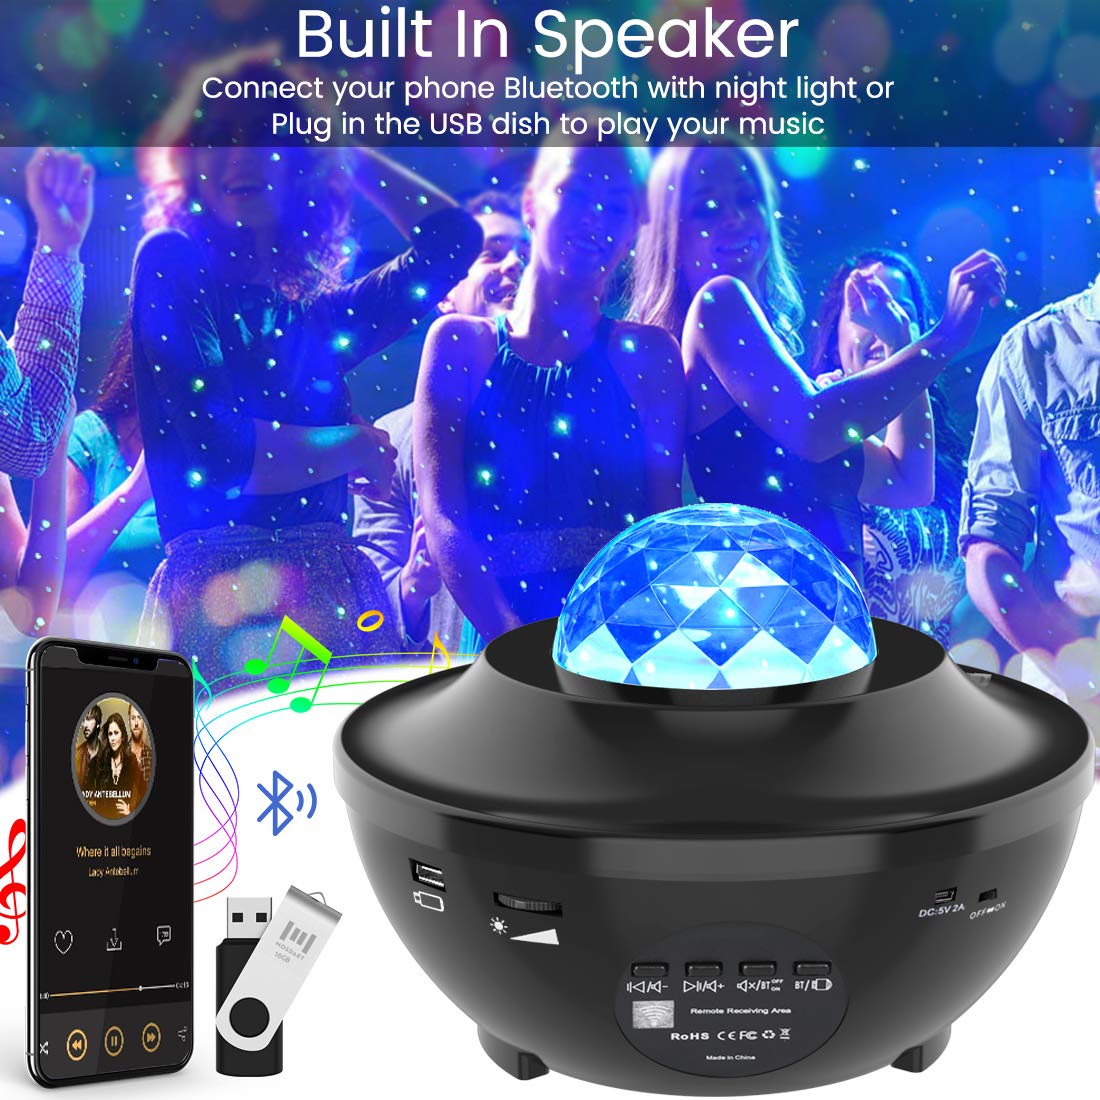 Night Light Projector with Bluetooth Music Speaker & Remote Control Birthday Gifts Home Theatre Galaxy Projector Star Projector Party Ocean Wave Star Light Projector for Baby Bedroom